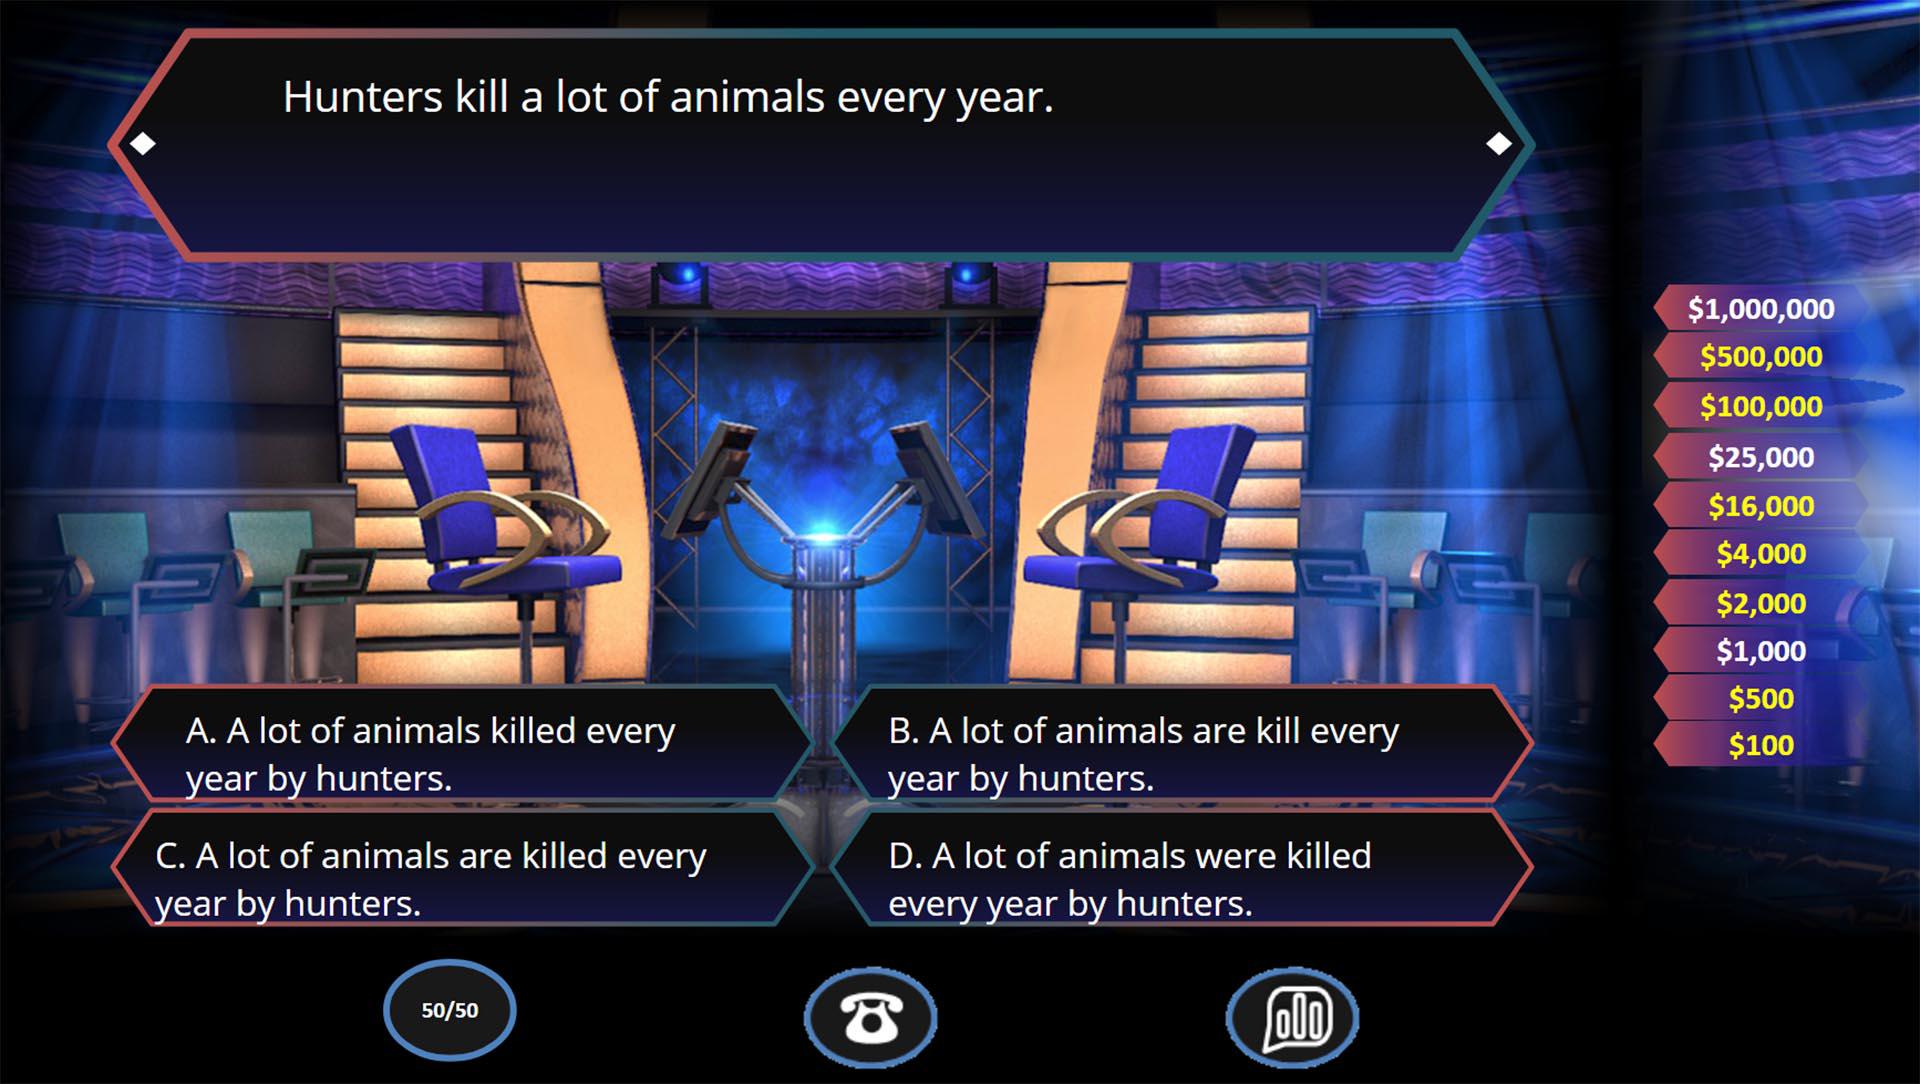 Who wants to be a millionaire Bringing classic TV games to eLearning